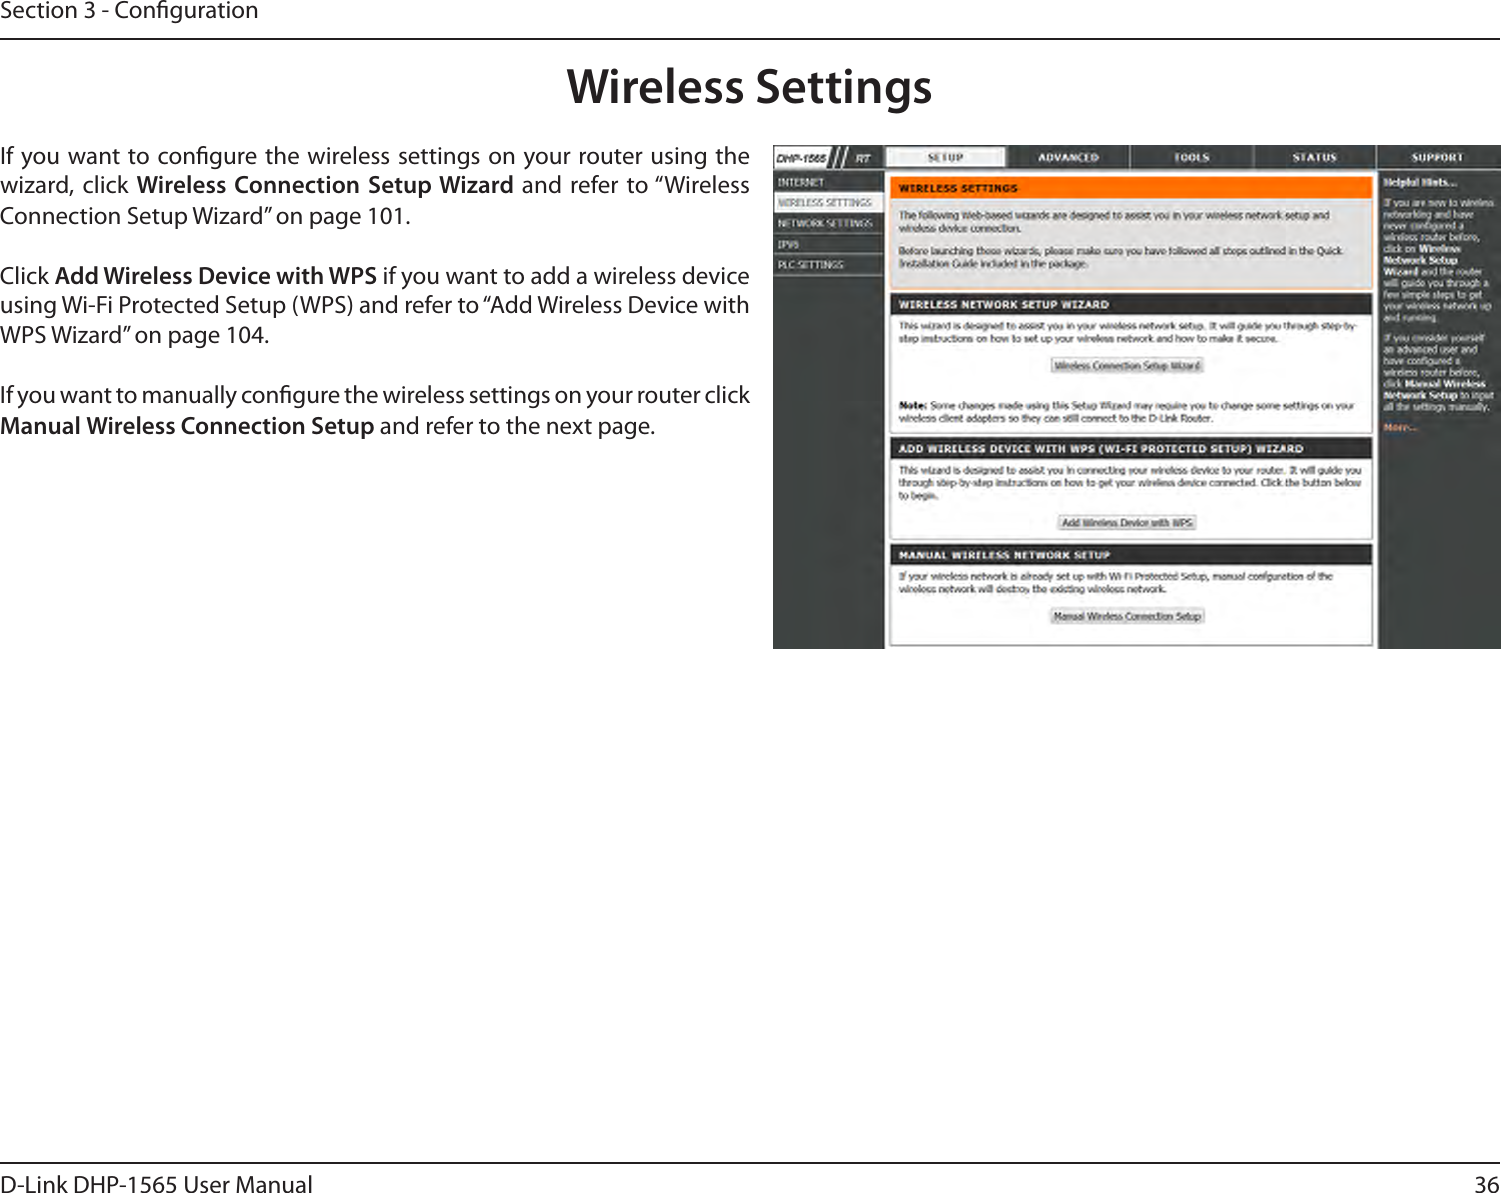 36D-Link DHP-1565 User ManualSection 3 - CongurationWireless SettingsIf you want to congure the wireless settings on your router using the wizard, click Wireless Connection Setup Wizard and refer to “Wireless Connection Setup Wizard” on page 101.Click Add Wireless Device with WPS if you want to add a wireless device using Wi-Fi Protected Setup (WPS) and refer to “Add Wireless Device with WPS Wizard” on page 104.If you want to manually congure the wireless settings on your router click Manual Wireless Connection Setup and refer to the next page.